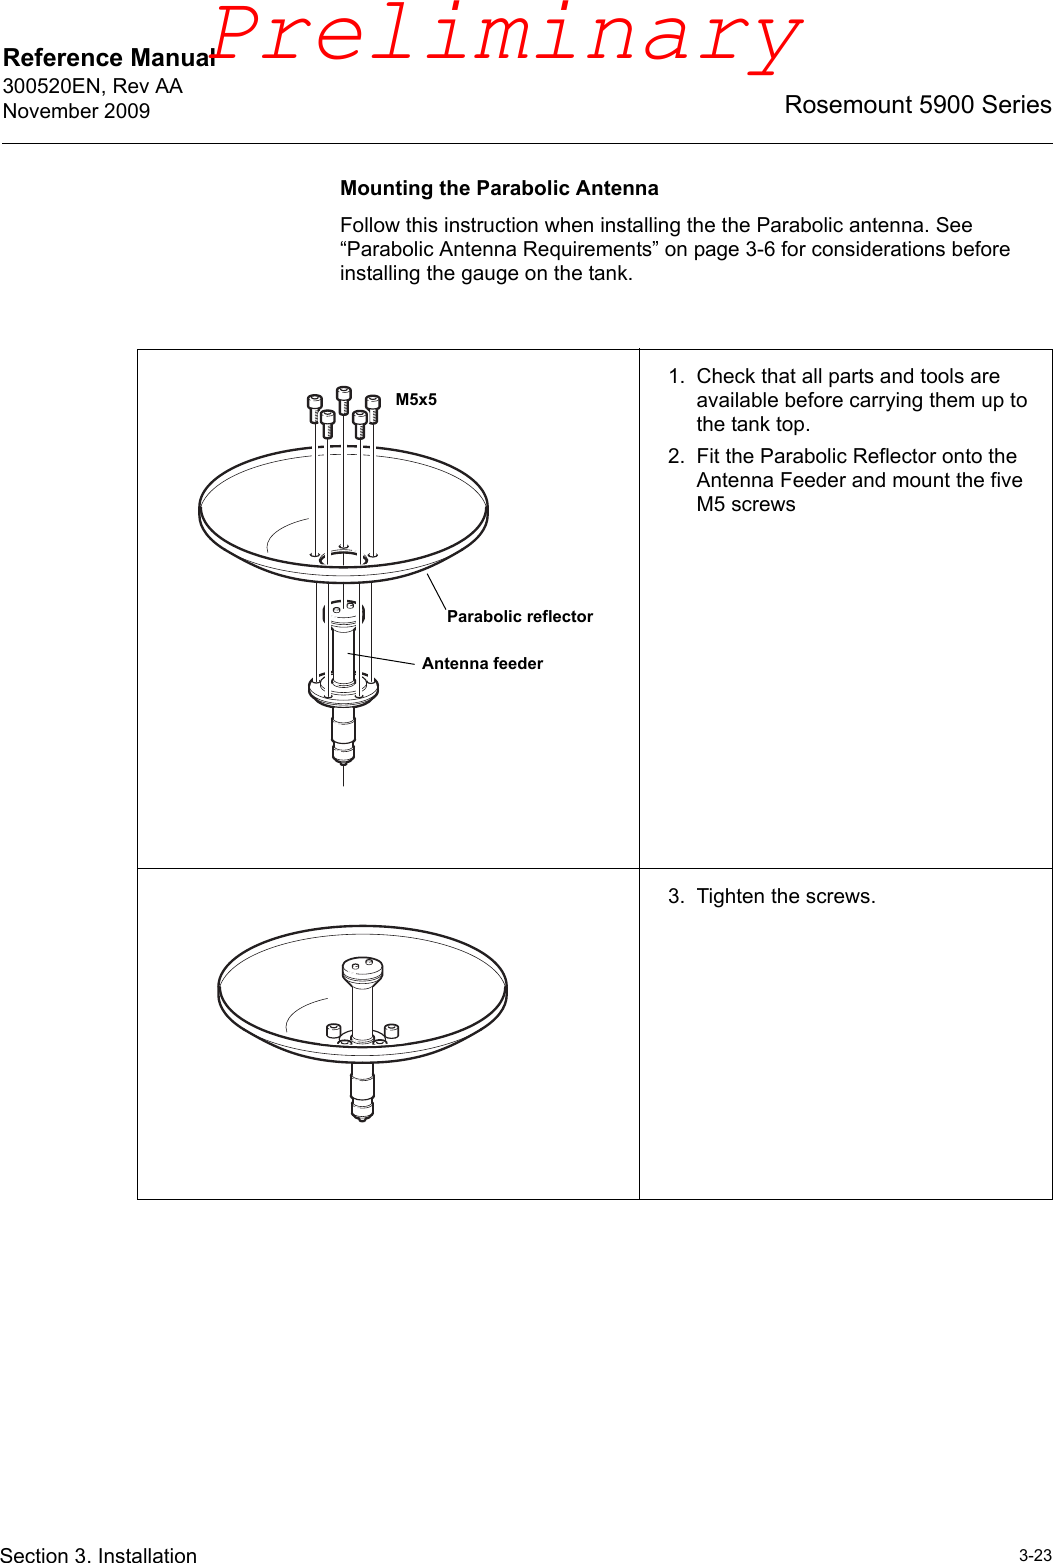 Reference Manual 300520EN, Rev AANovember 20093-23Rosemount 5900 SeriesSection 3. InstallationMounting the Parabolic AntennaFollow this instruction when installing the the Parabolic antenna. See “Parabolic Antenna Requirements” on page 3-6 for considerations before installing the gauge on the tank.1. Check that all parts and tools are available before carrying them up to the tank top.2. Fit the Parabolic Reflector onto the Antenna Feeder and mount the five M5 screws3. Tighten the screws.Parabolic reflectorAntenna feederM5x5Preliminary